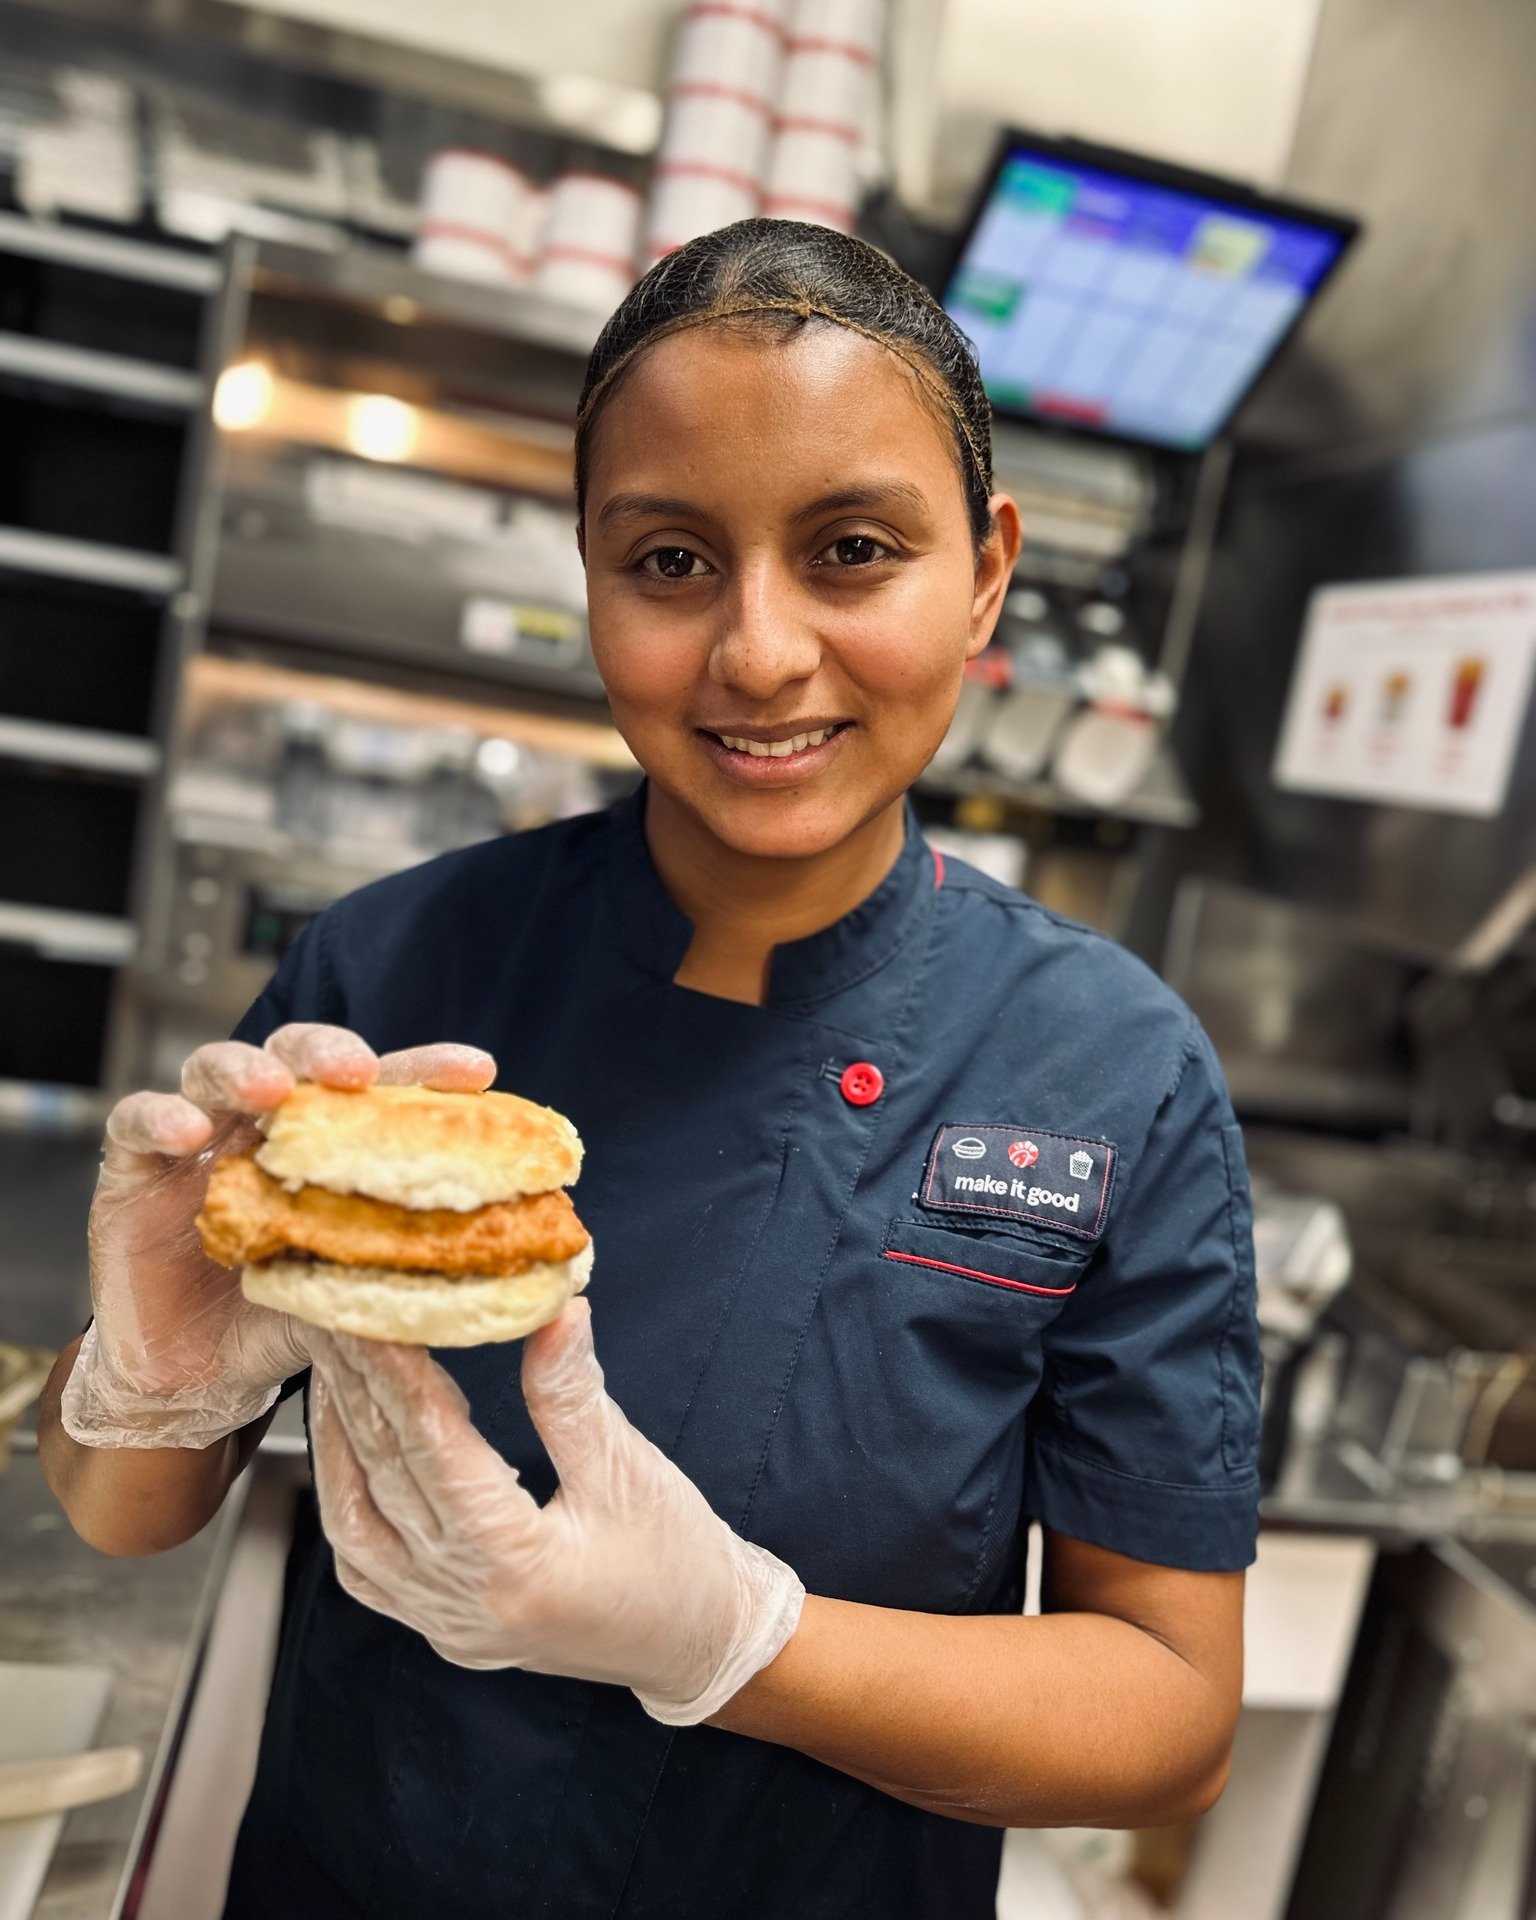 Join us for Breakfast: Biscuit Giveaway Day! 🐔

If you haven't tried our breakfast yet, this is your chance! Stop by the restaurant from Monday, May 13, between 6:30-10:30am, mention this promotion, and receive a Free Original Chicken Biscuit. 

No 